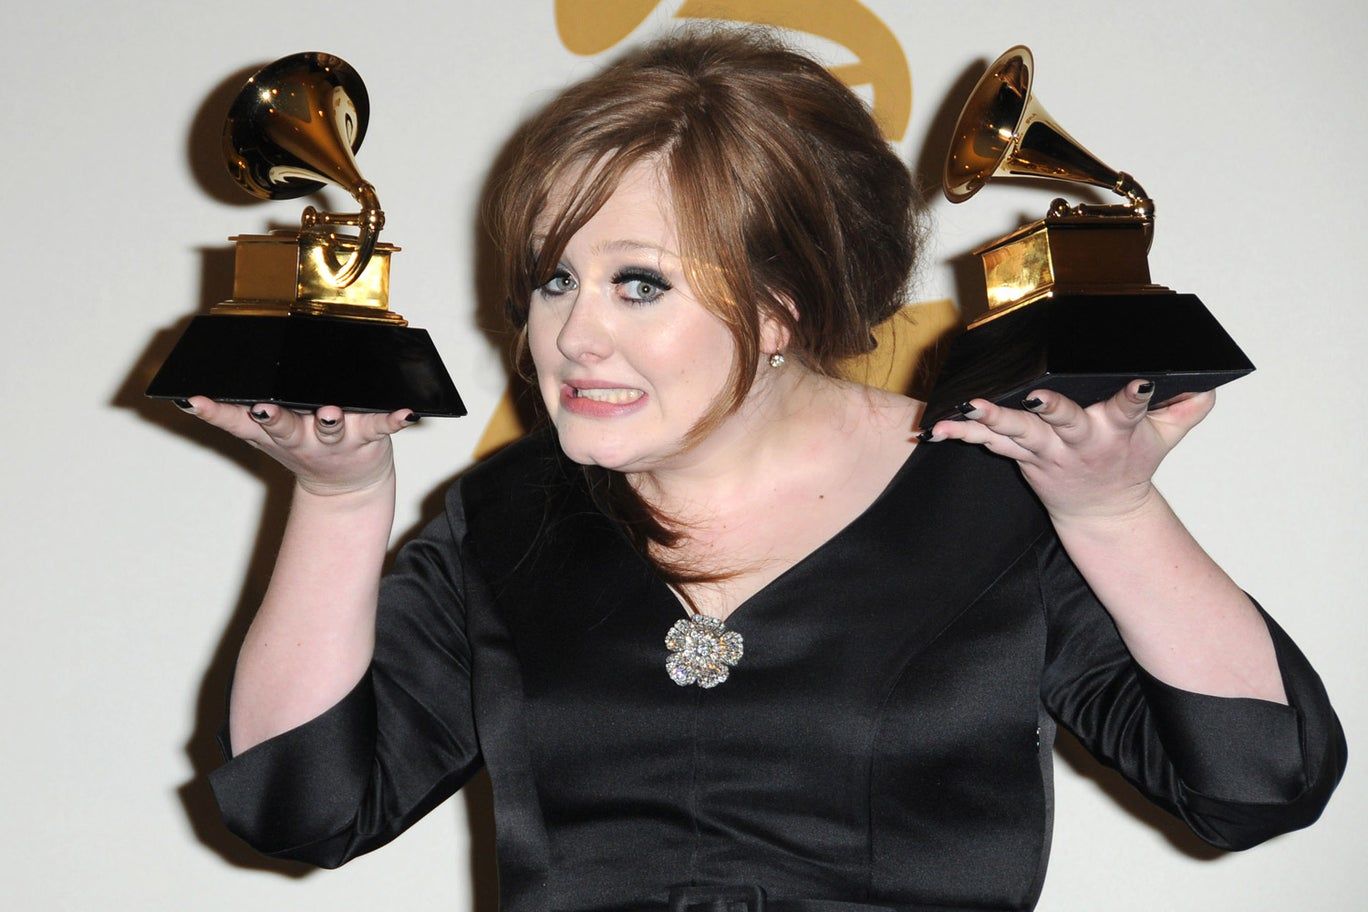 How Adele became the biggest musician in the world